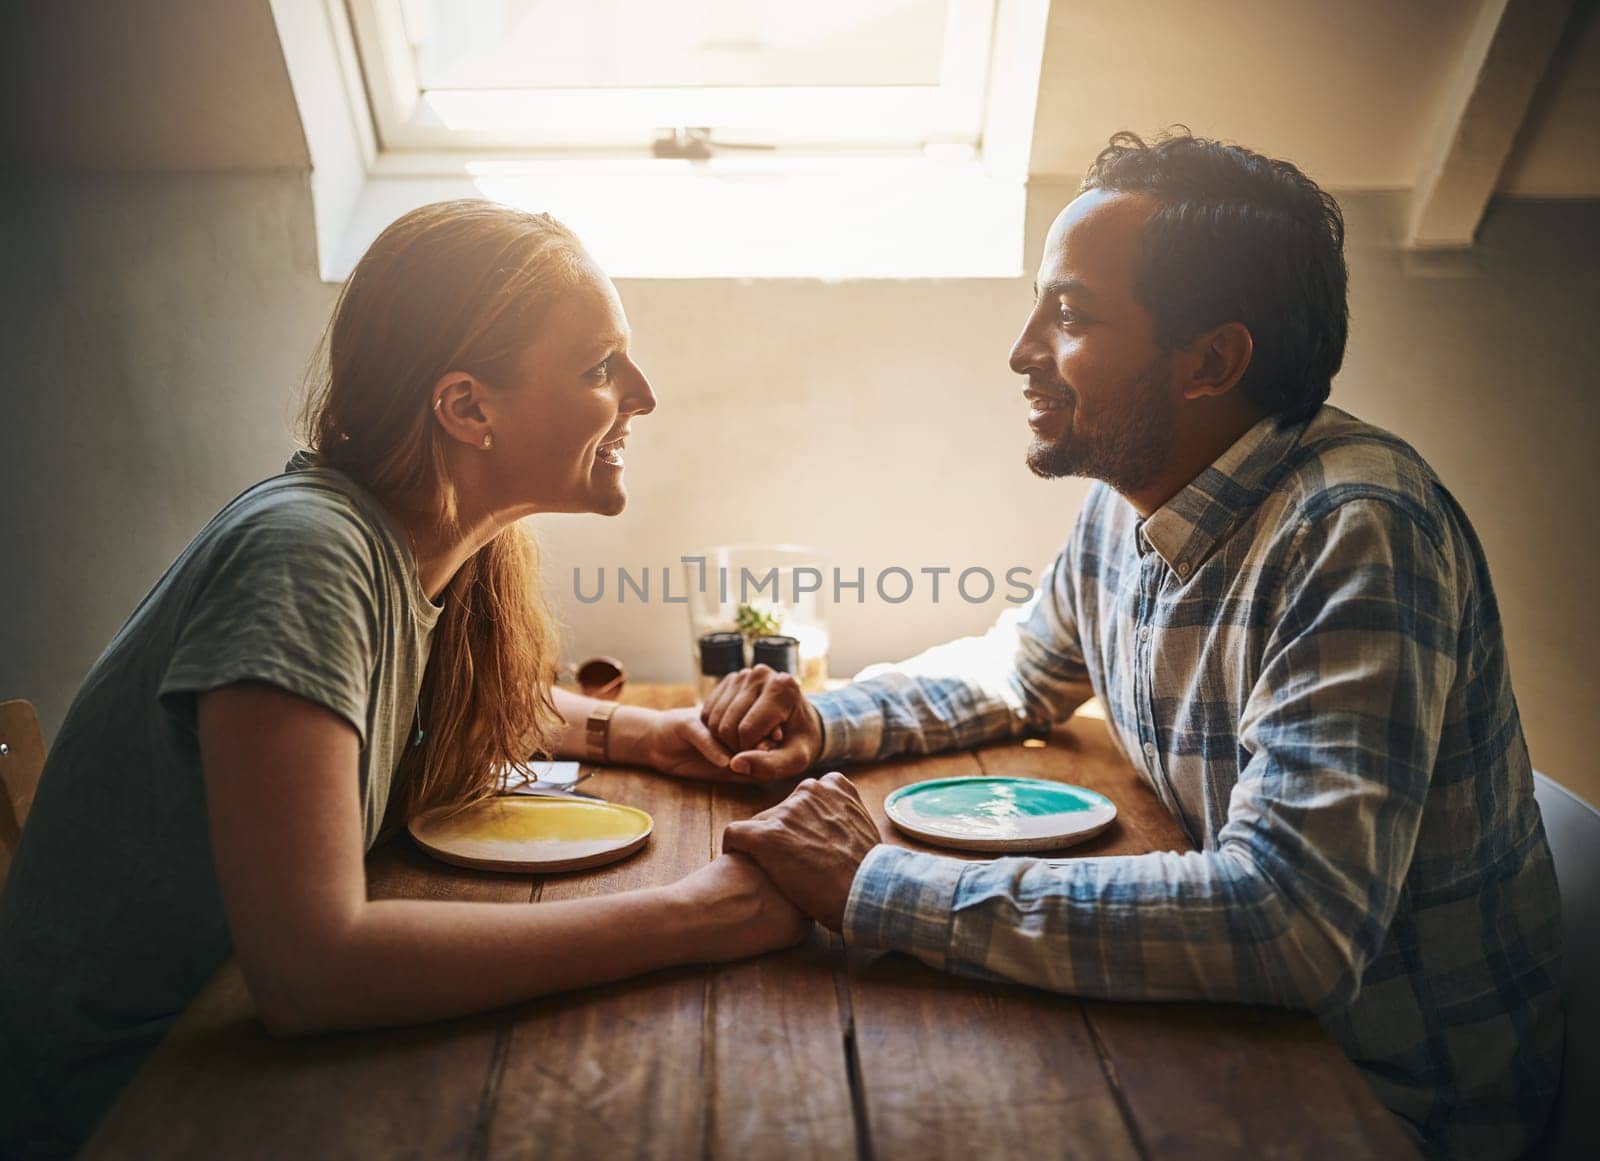 Love, couple and holding hands at home on table, talking and bonding together. Valentines day, romance diversity and affection of man and woman on date, having fun and enjoying quality time in house